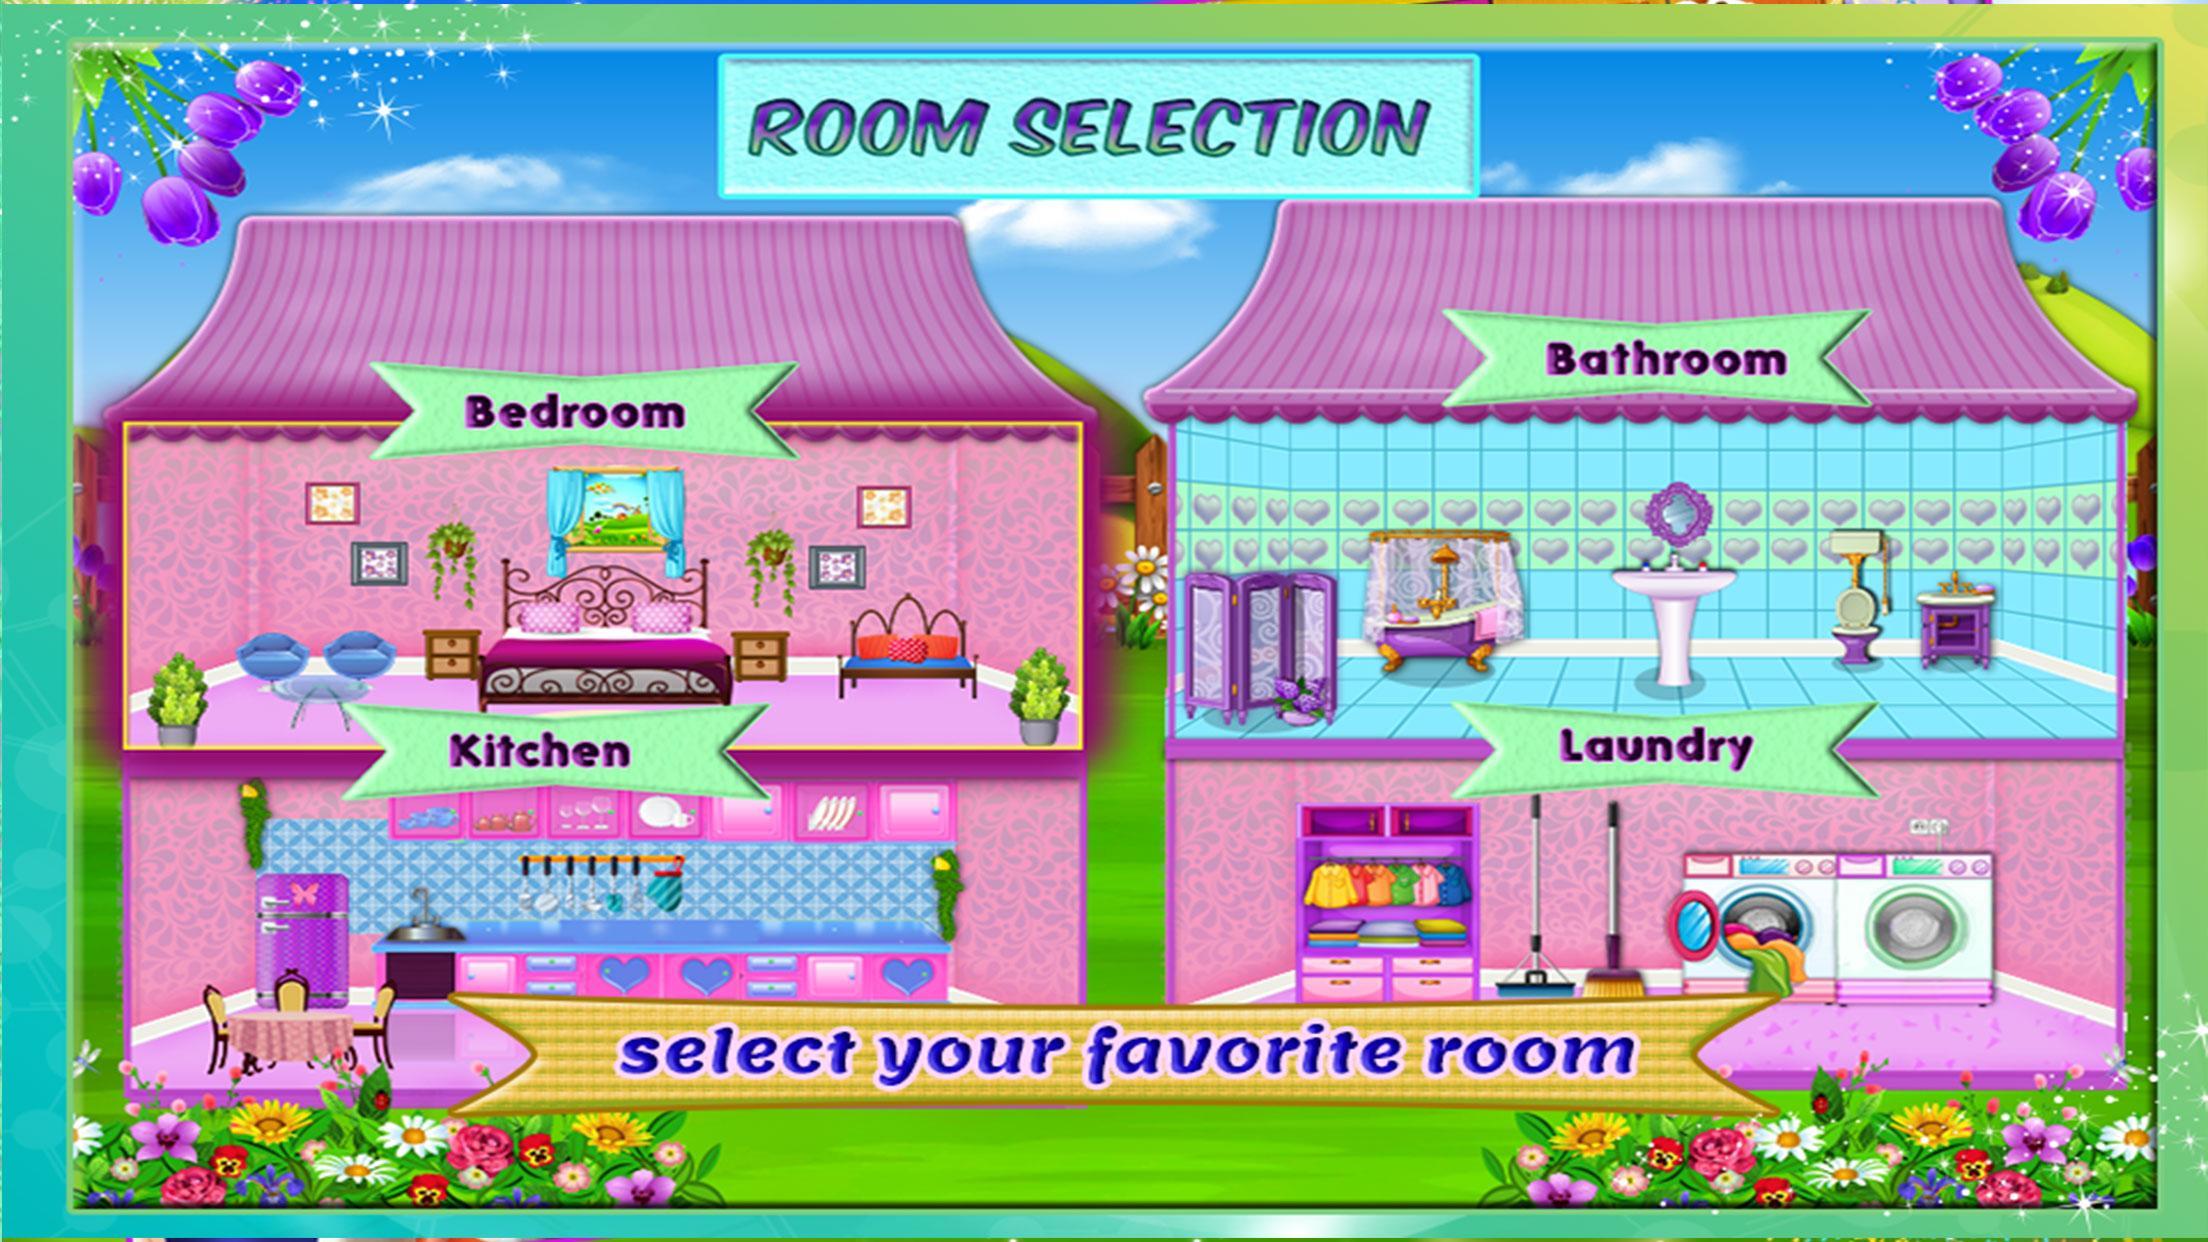 Doll Dream House Decorating Games For Android Apk Download